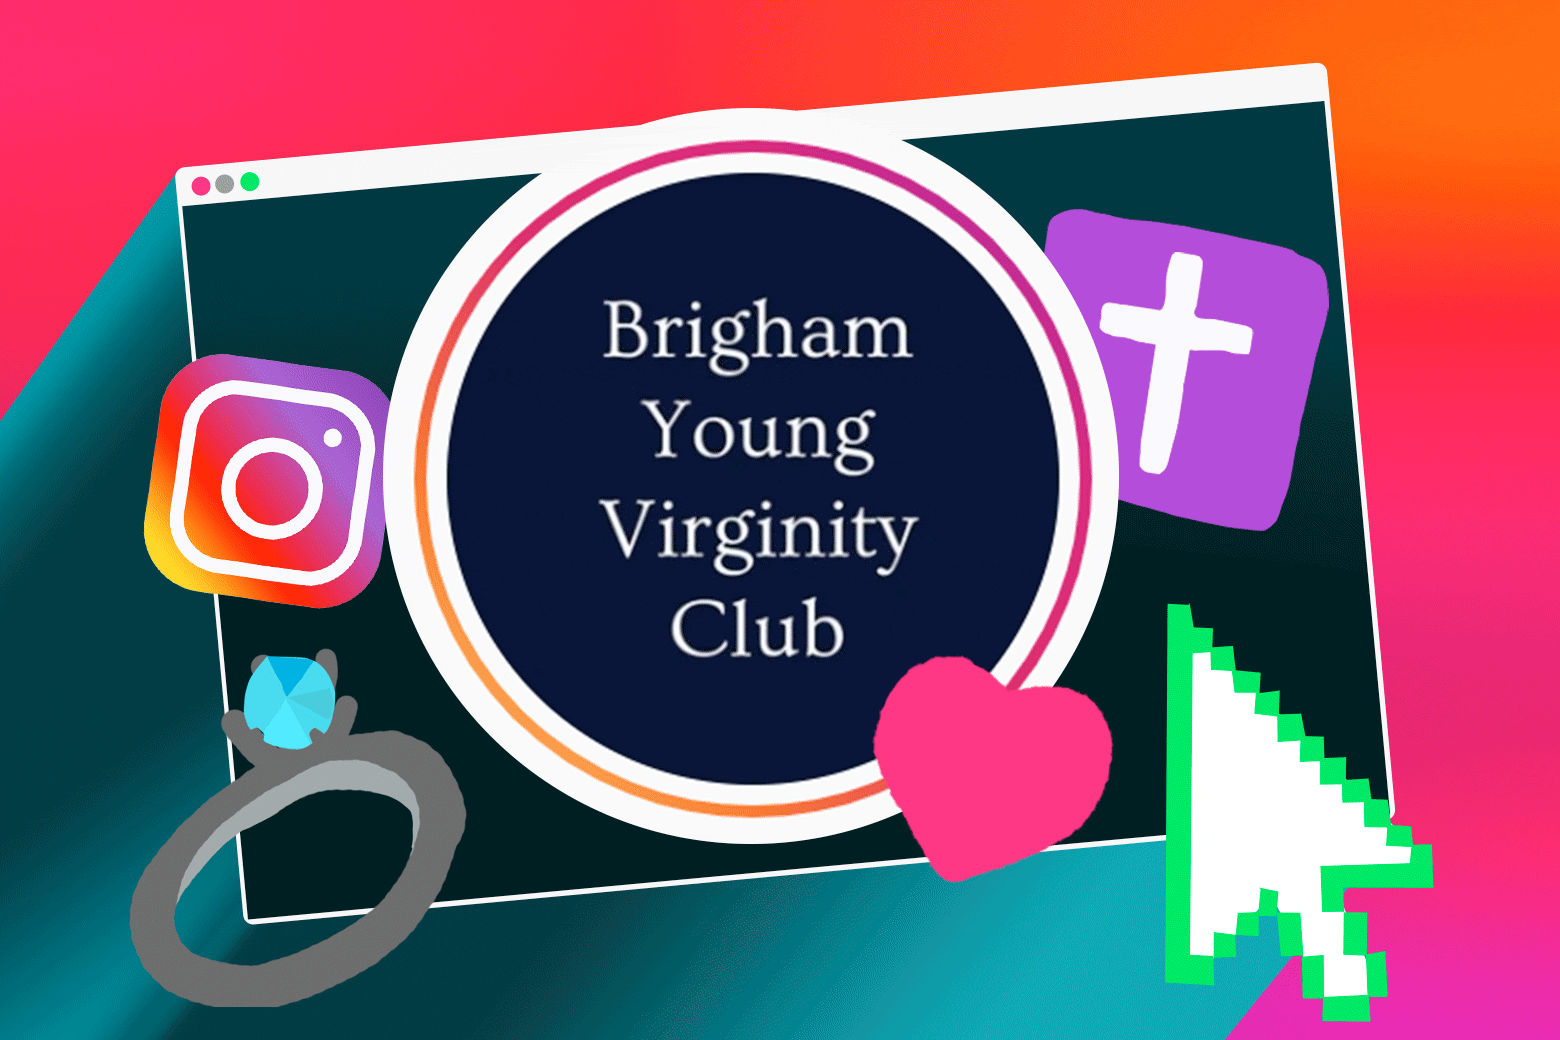 A computer screen that says Brigham Young University Club surrounded by emoji and an Instagram logo.